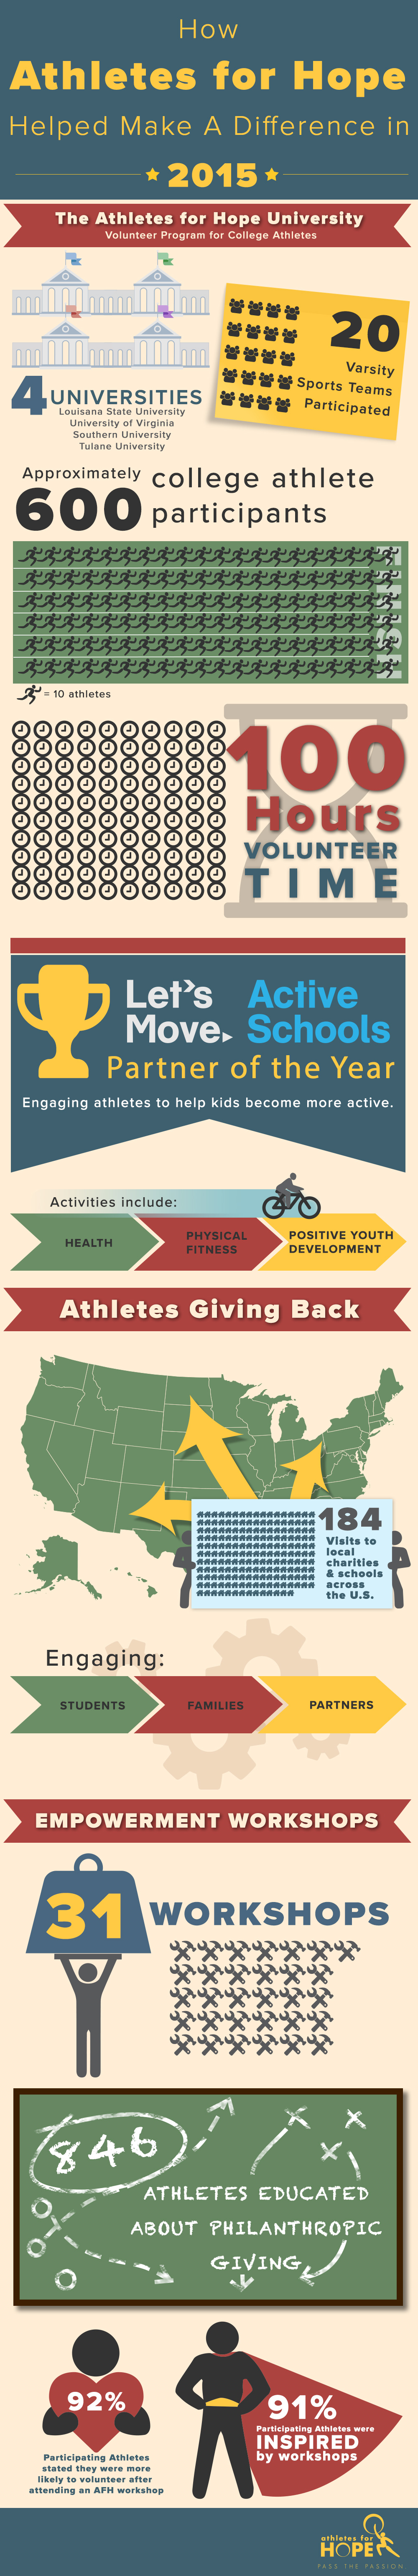 AFH_Make_a_Difference_2015_infographic_v3